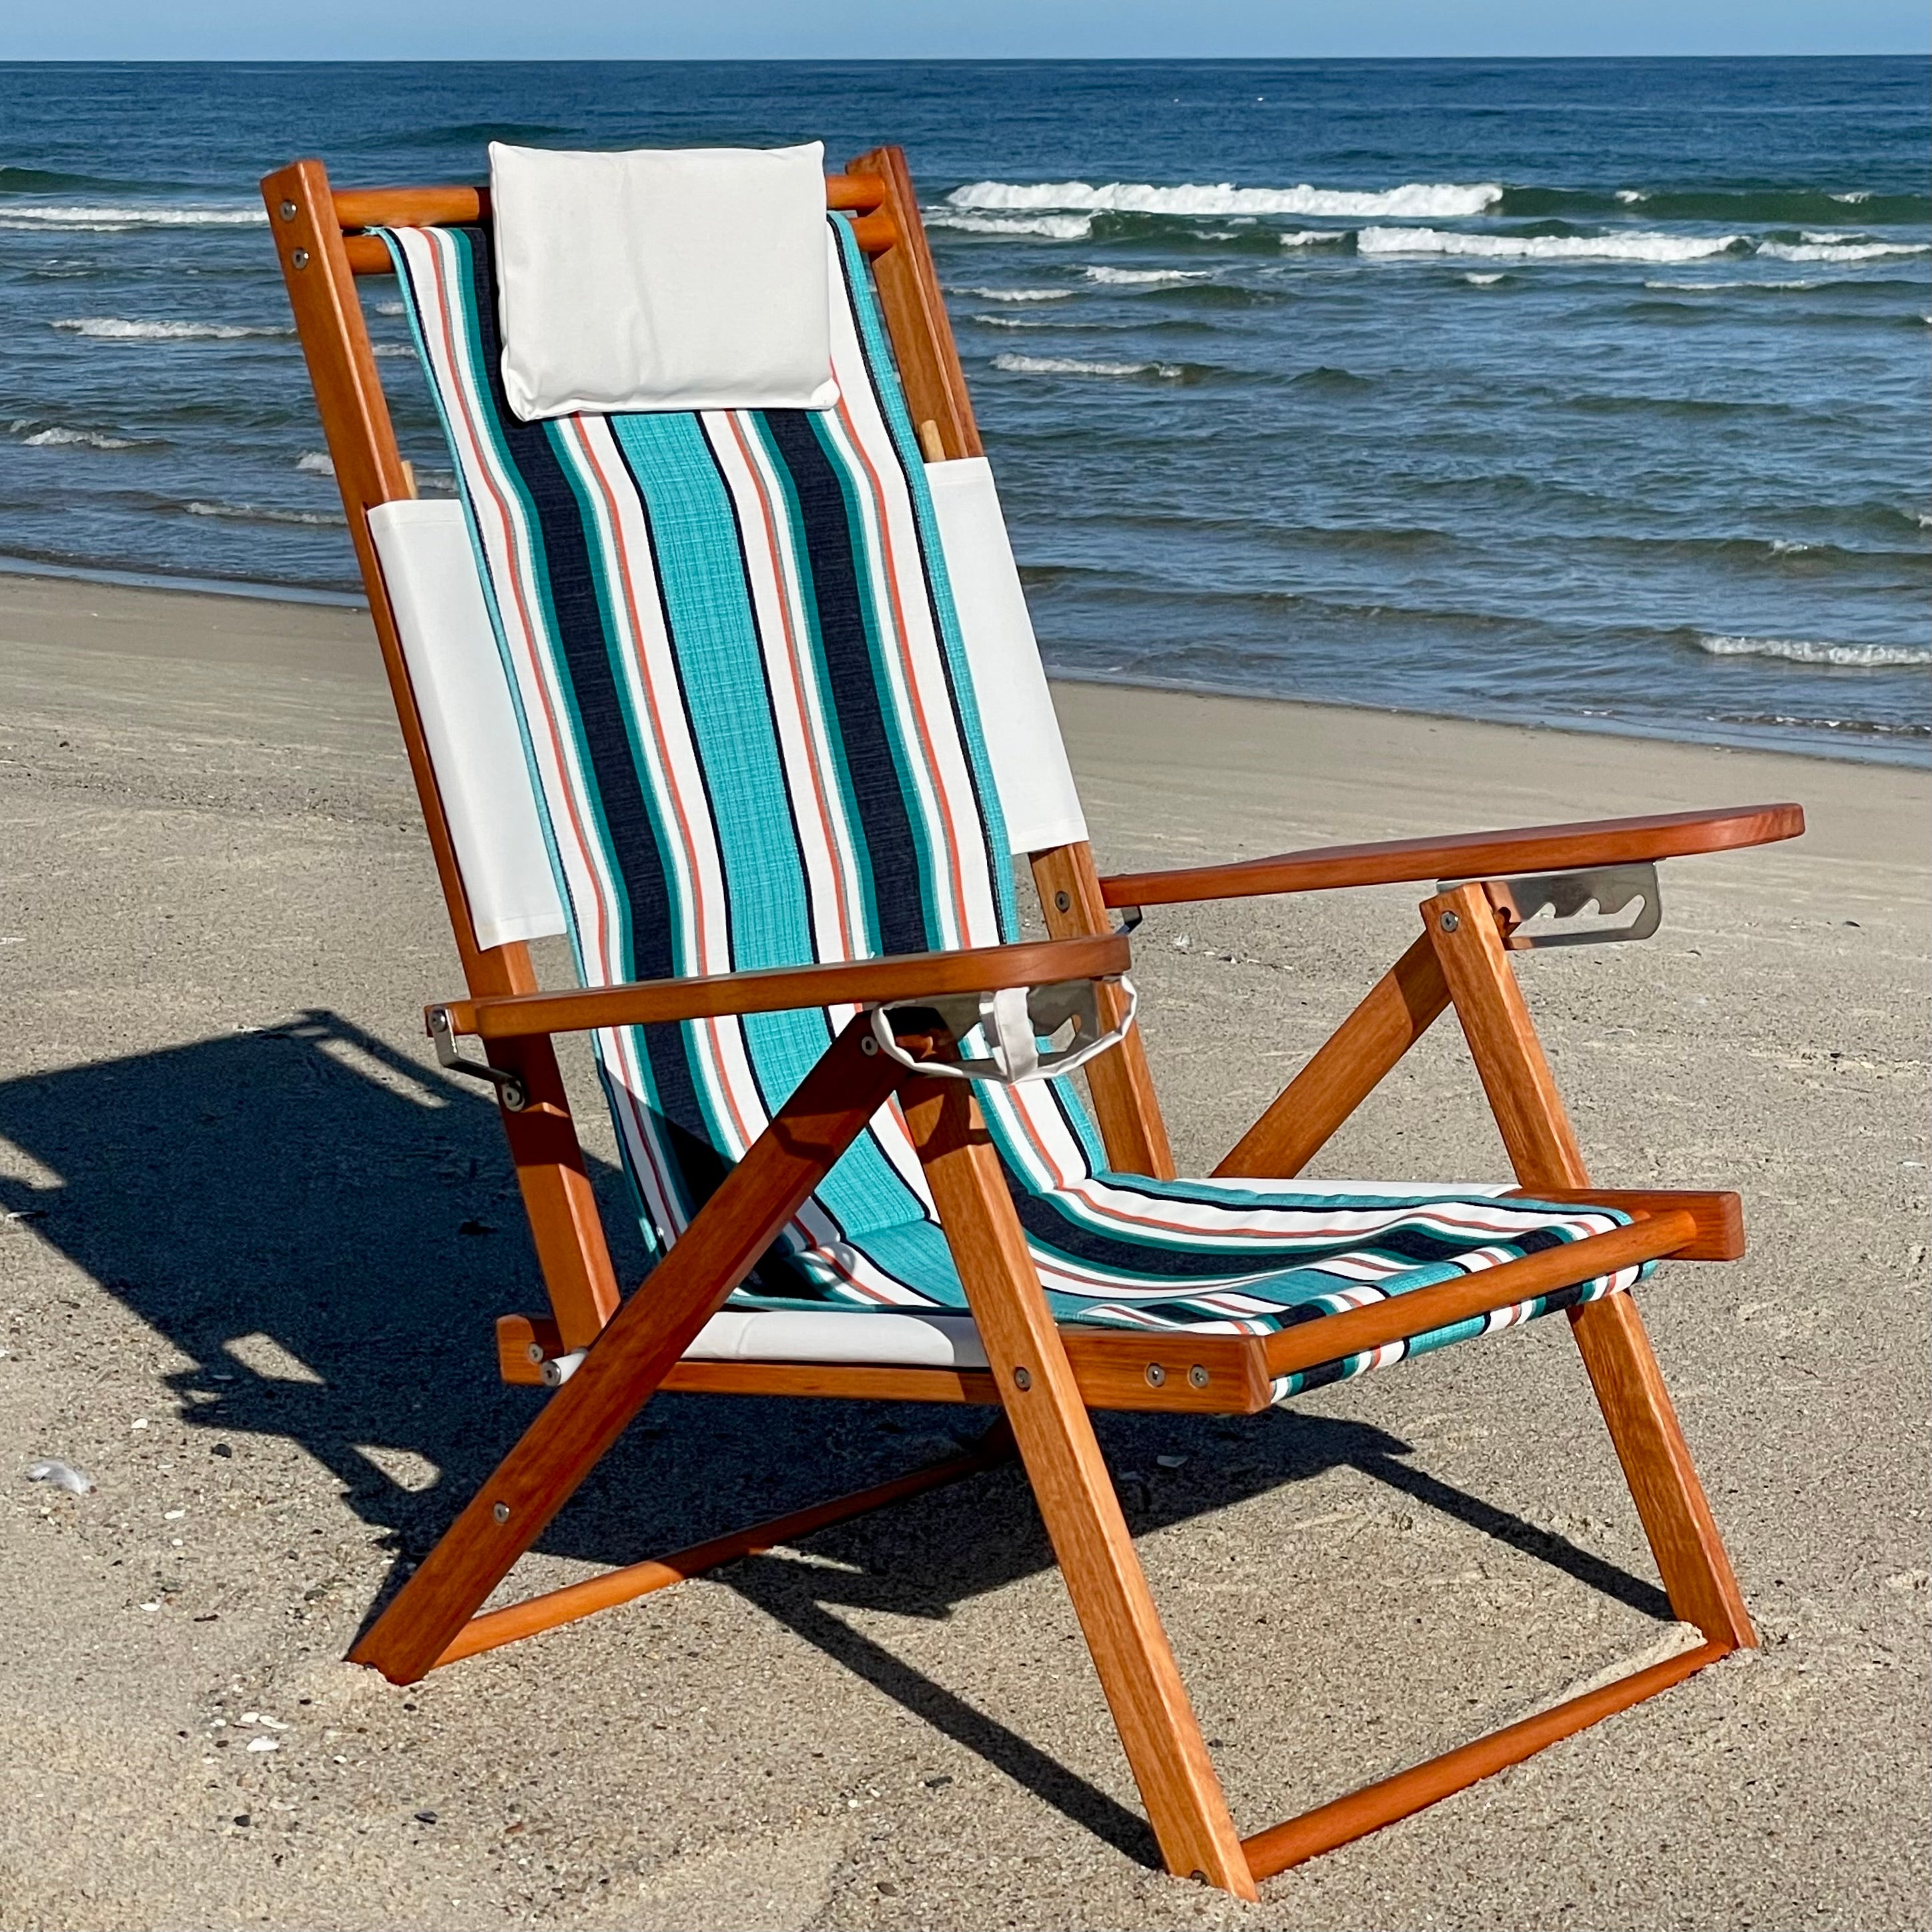 Don't miss these limited time offerings of the best beach chair on Cape Cod and beyond